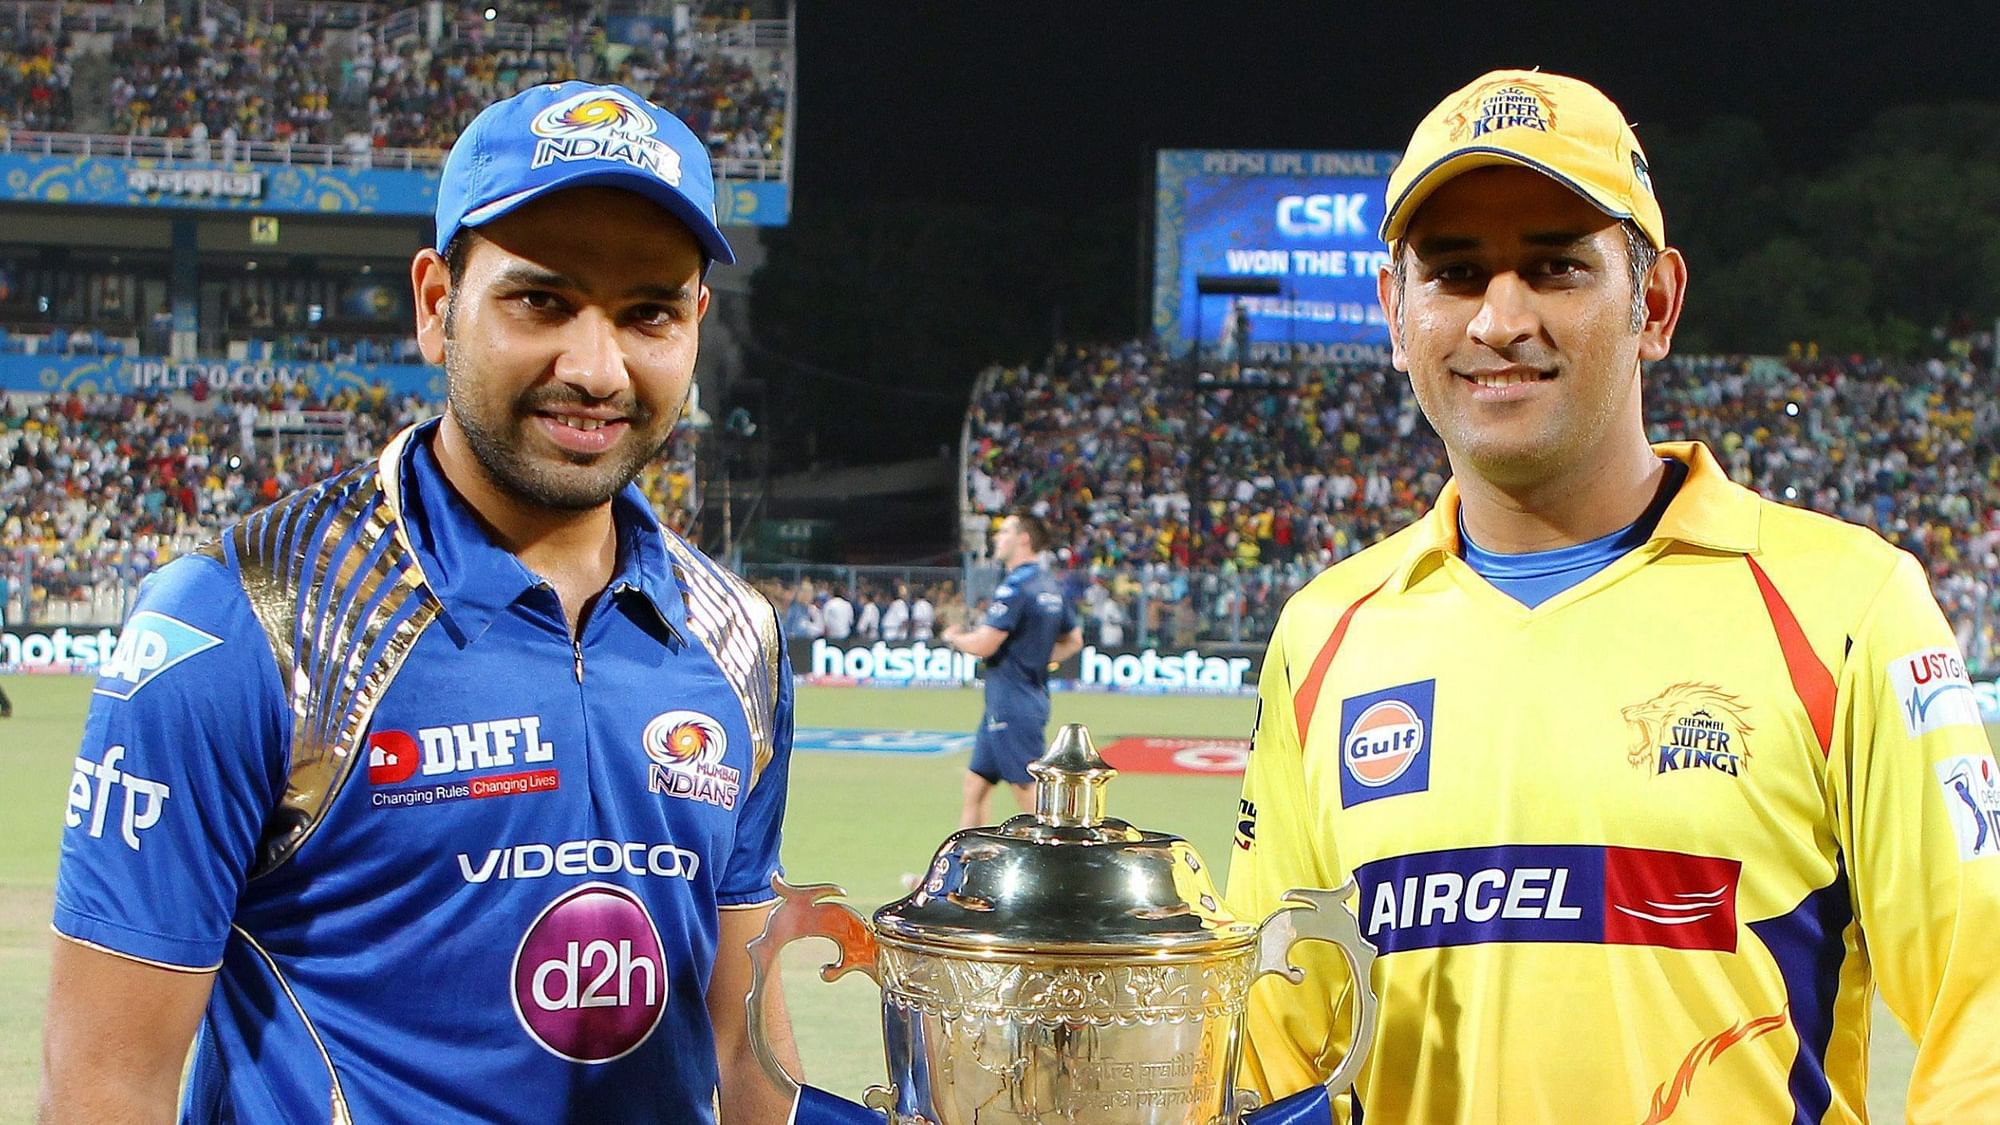 IPL 2020 Full Schedule, PDF, Team, Venue, Date, Time Table: Rohit Sharma’s Mumbai Indians will play Dhoni’s Chennai Super Kings in the opener.